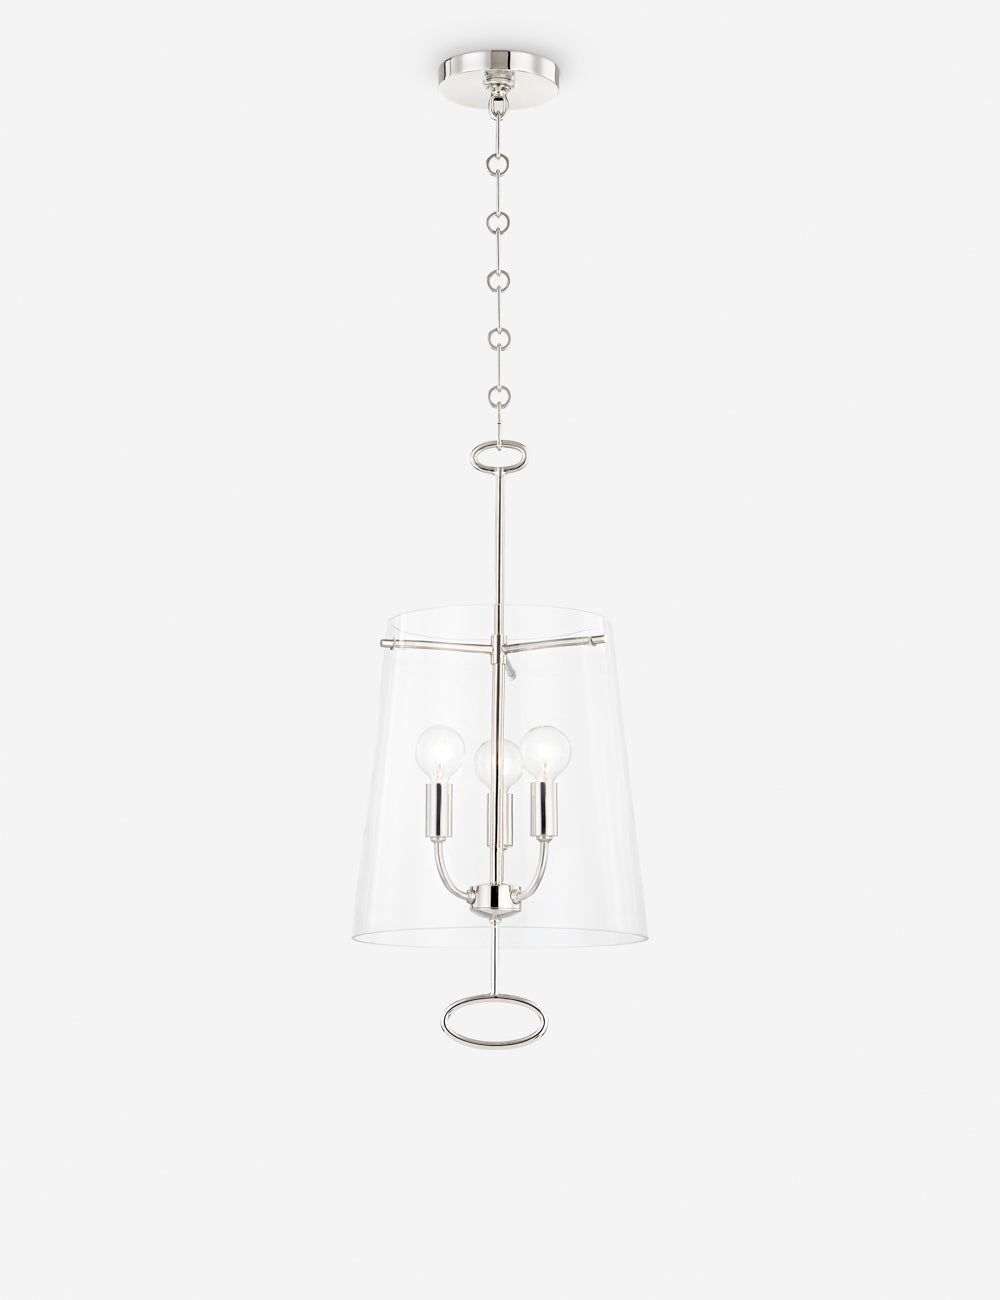 Elegant James Polished Nickel 3-Light Drum Pendant with Clear Glass